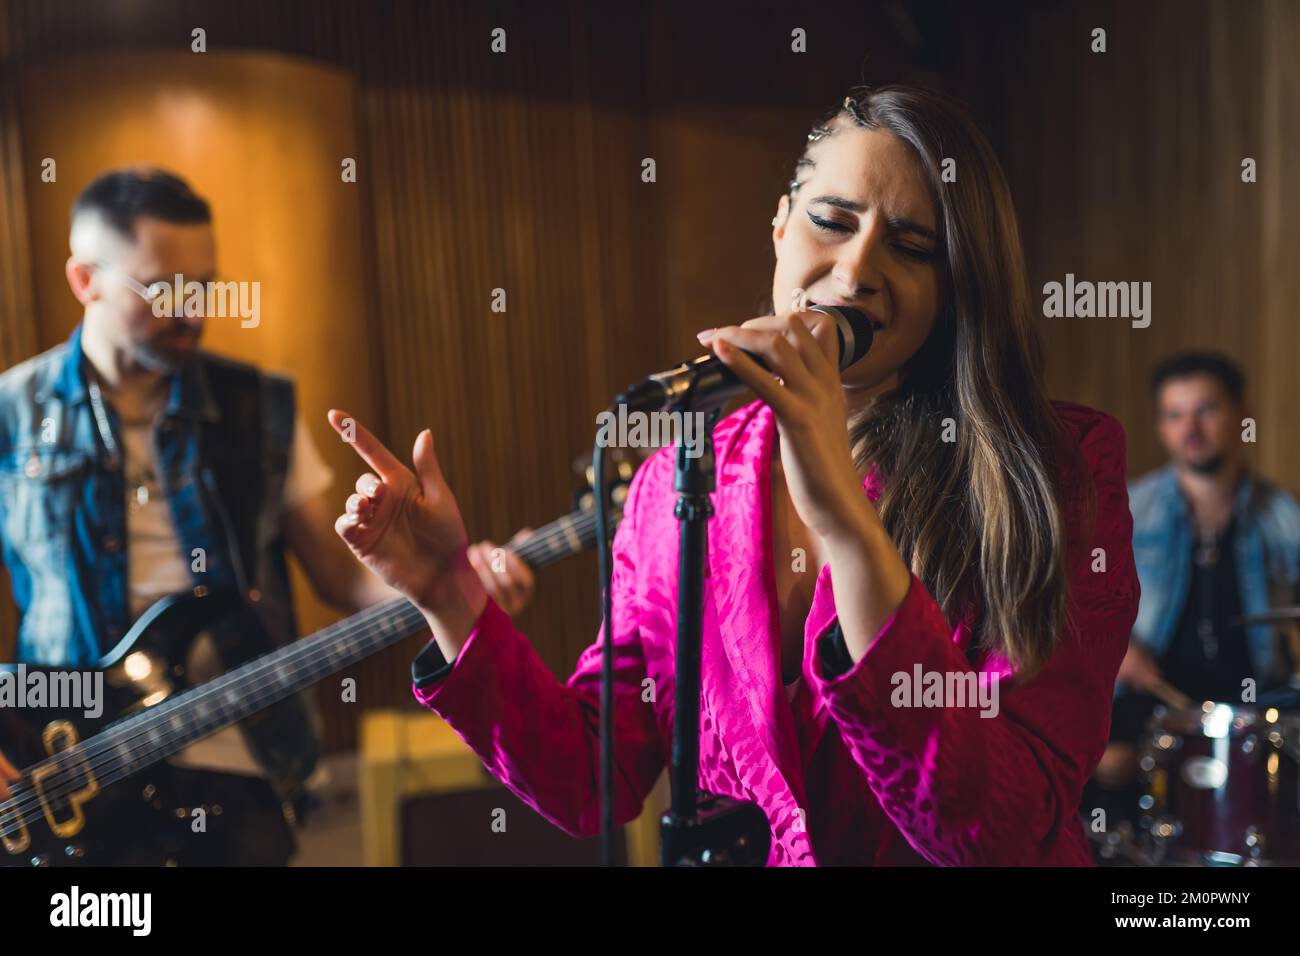 Woman singing and the music band accompanying her. High quality photo Stock Photo